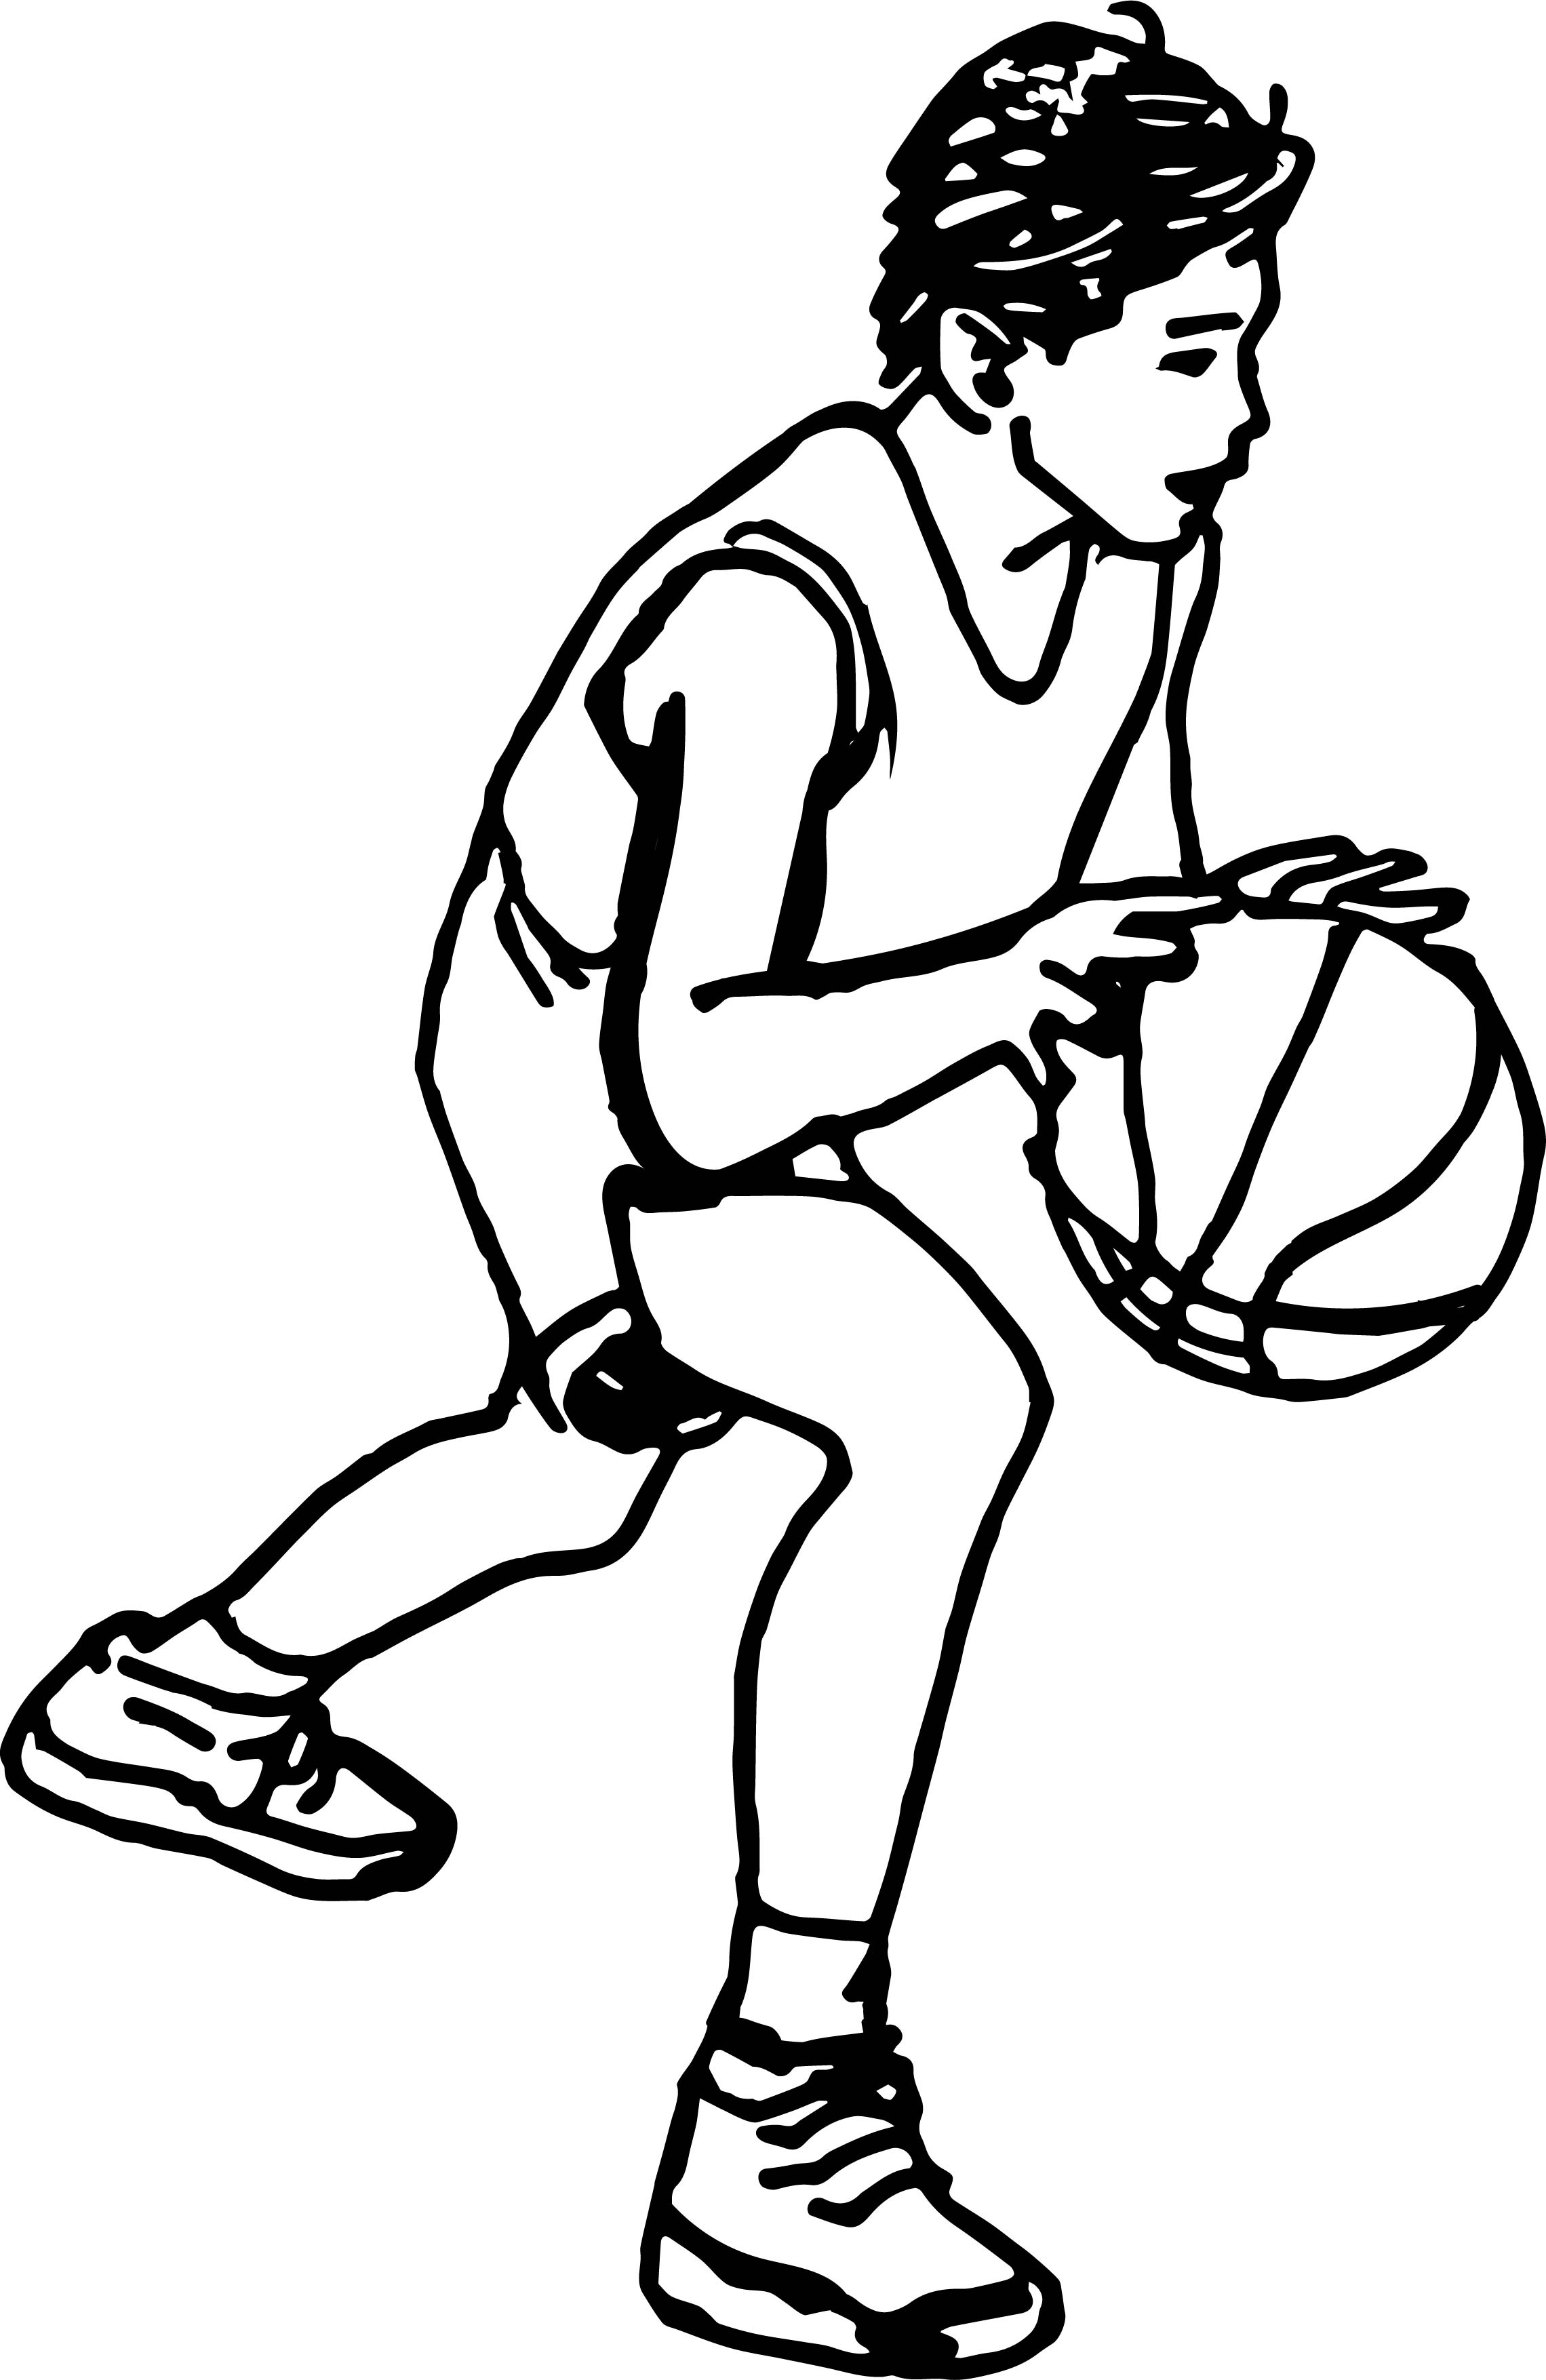 Playing Basketball Drawing | Free download on ClipArtMag